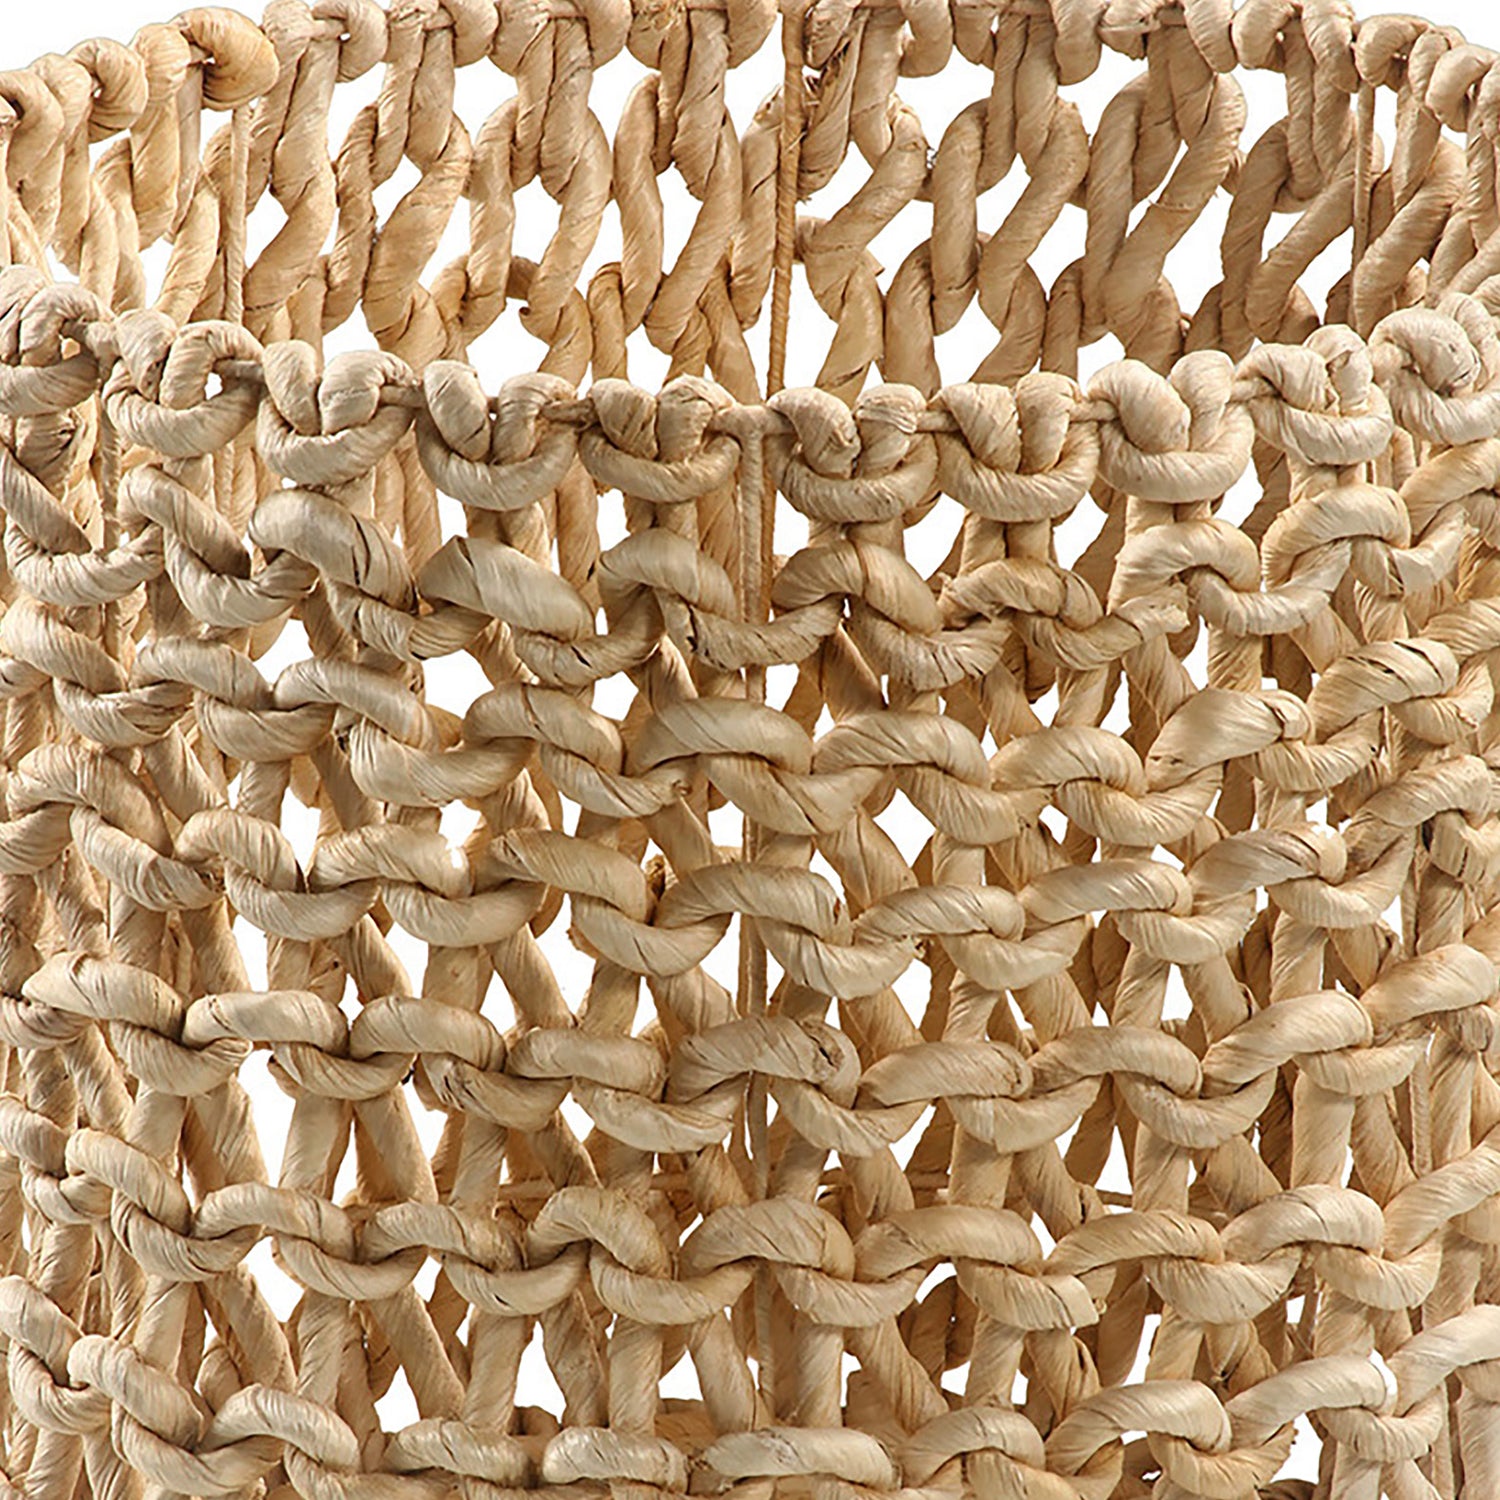 Elevate your home décor with this exquisite set of artisanal baskets, combining beauty and functionality in perfect harmony. Each basket is meticulously handcrafted, showcasing delicate braiding techniques that ensure their durability and timeless appeal. Amethyst Home provides interior design, new home construction design consulting, vintage area rugs, and lighting in the Houston metro area.